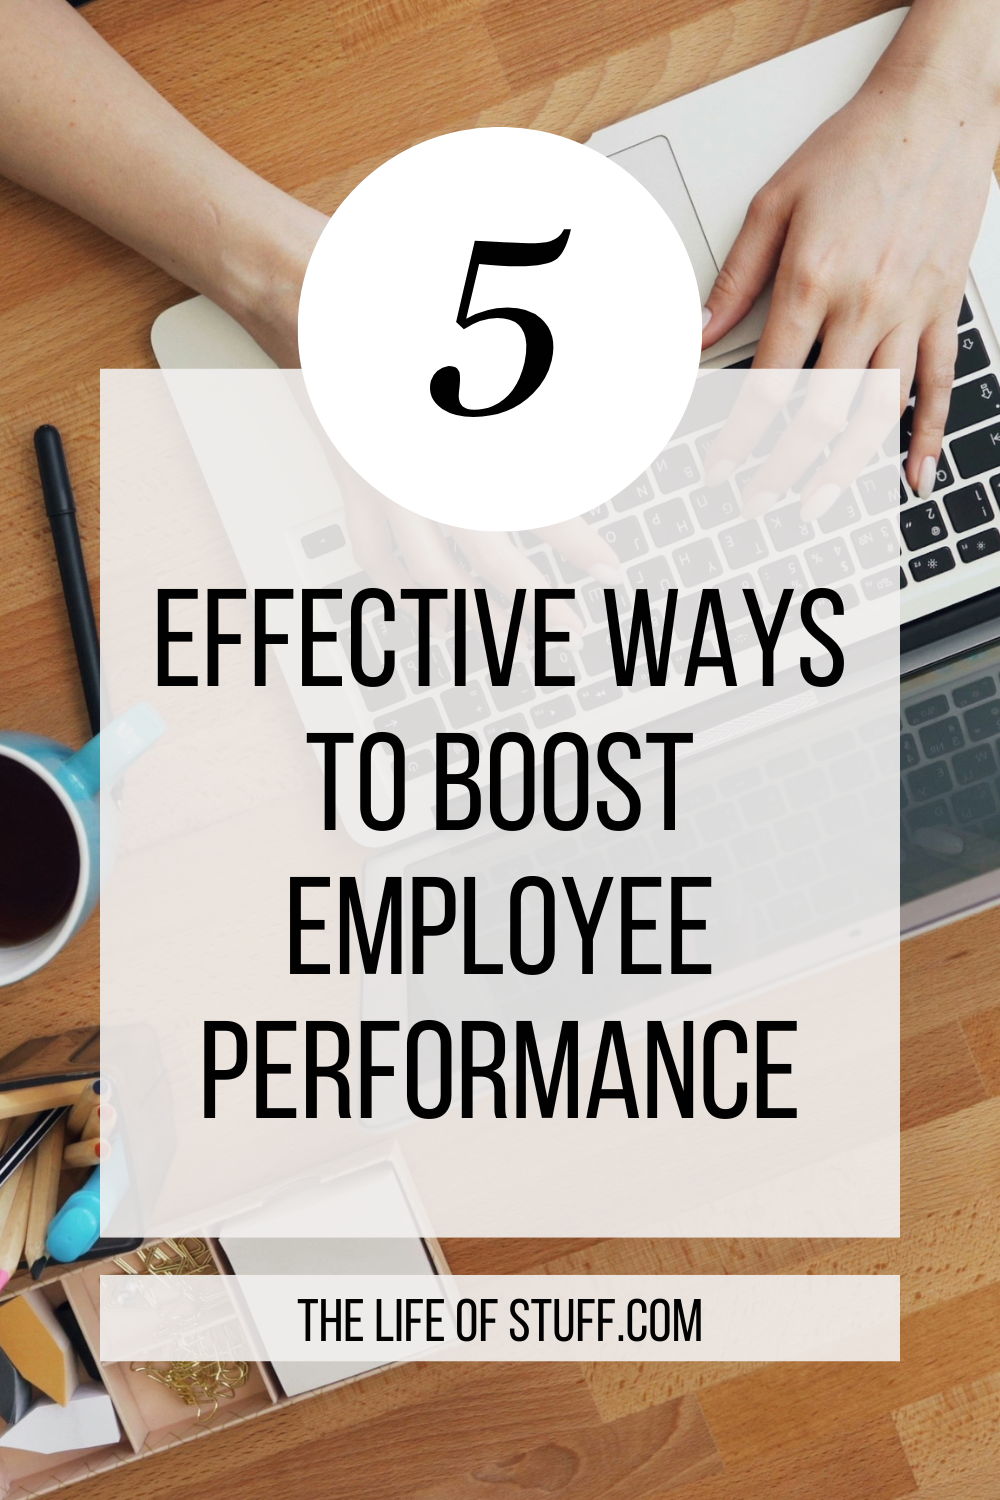 Effective Ways To Boost Employee Performance - The Life of Stuff